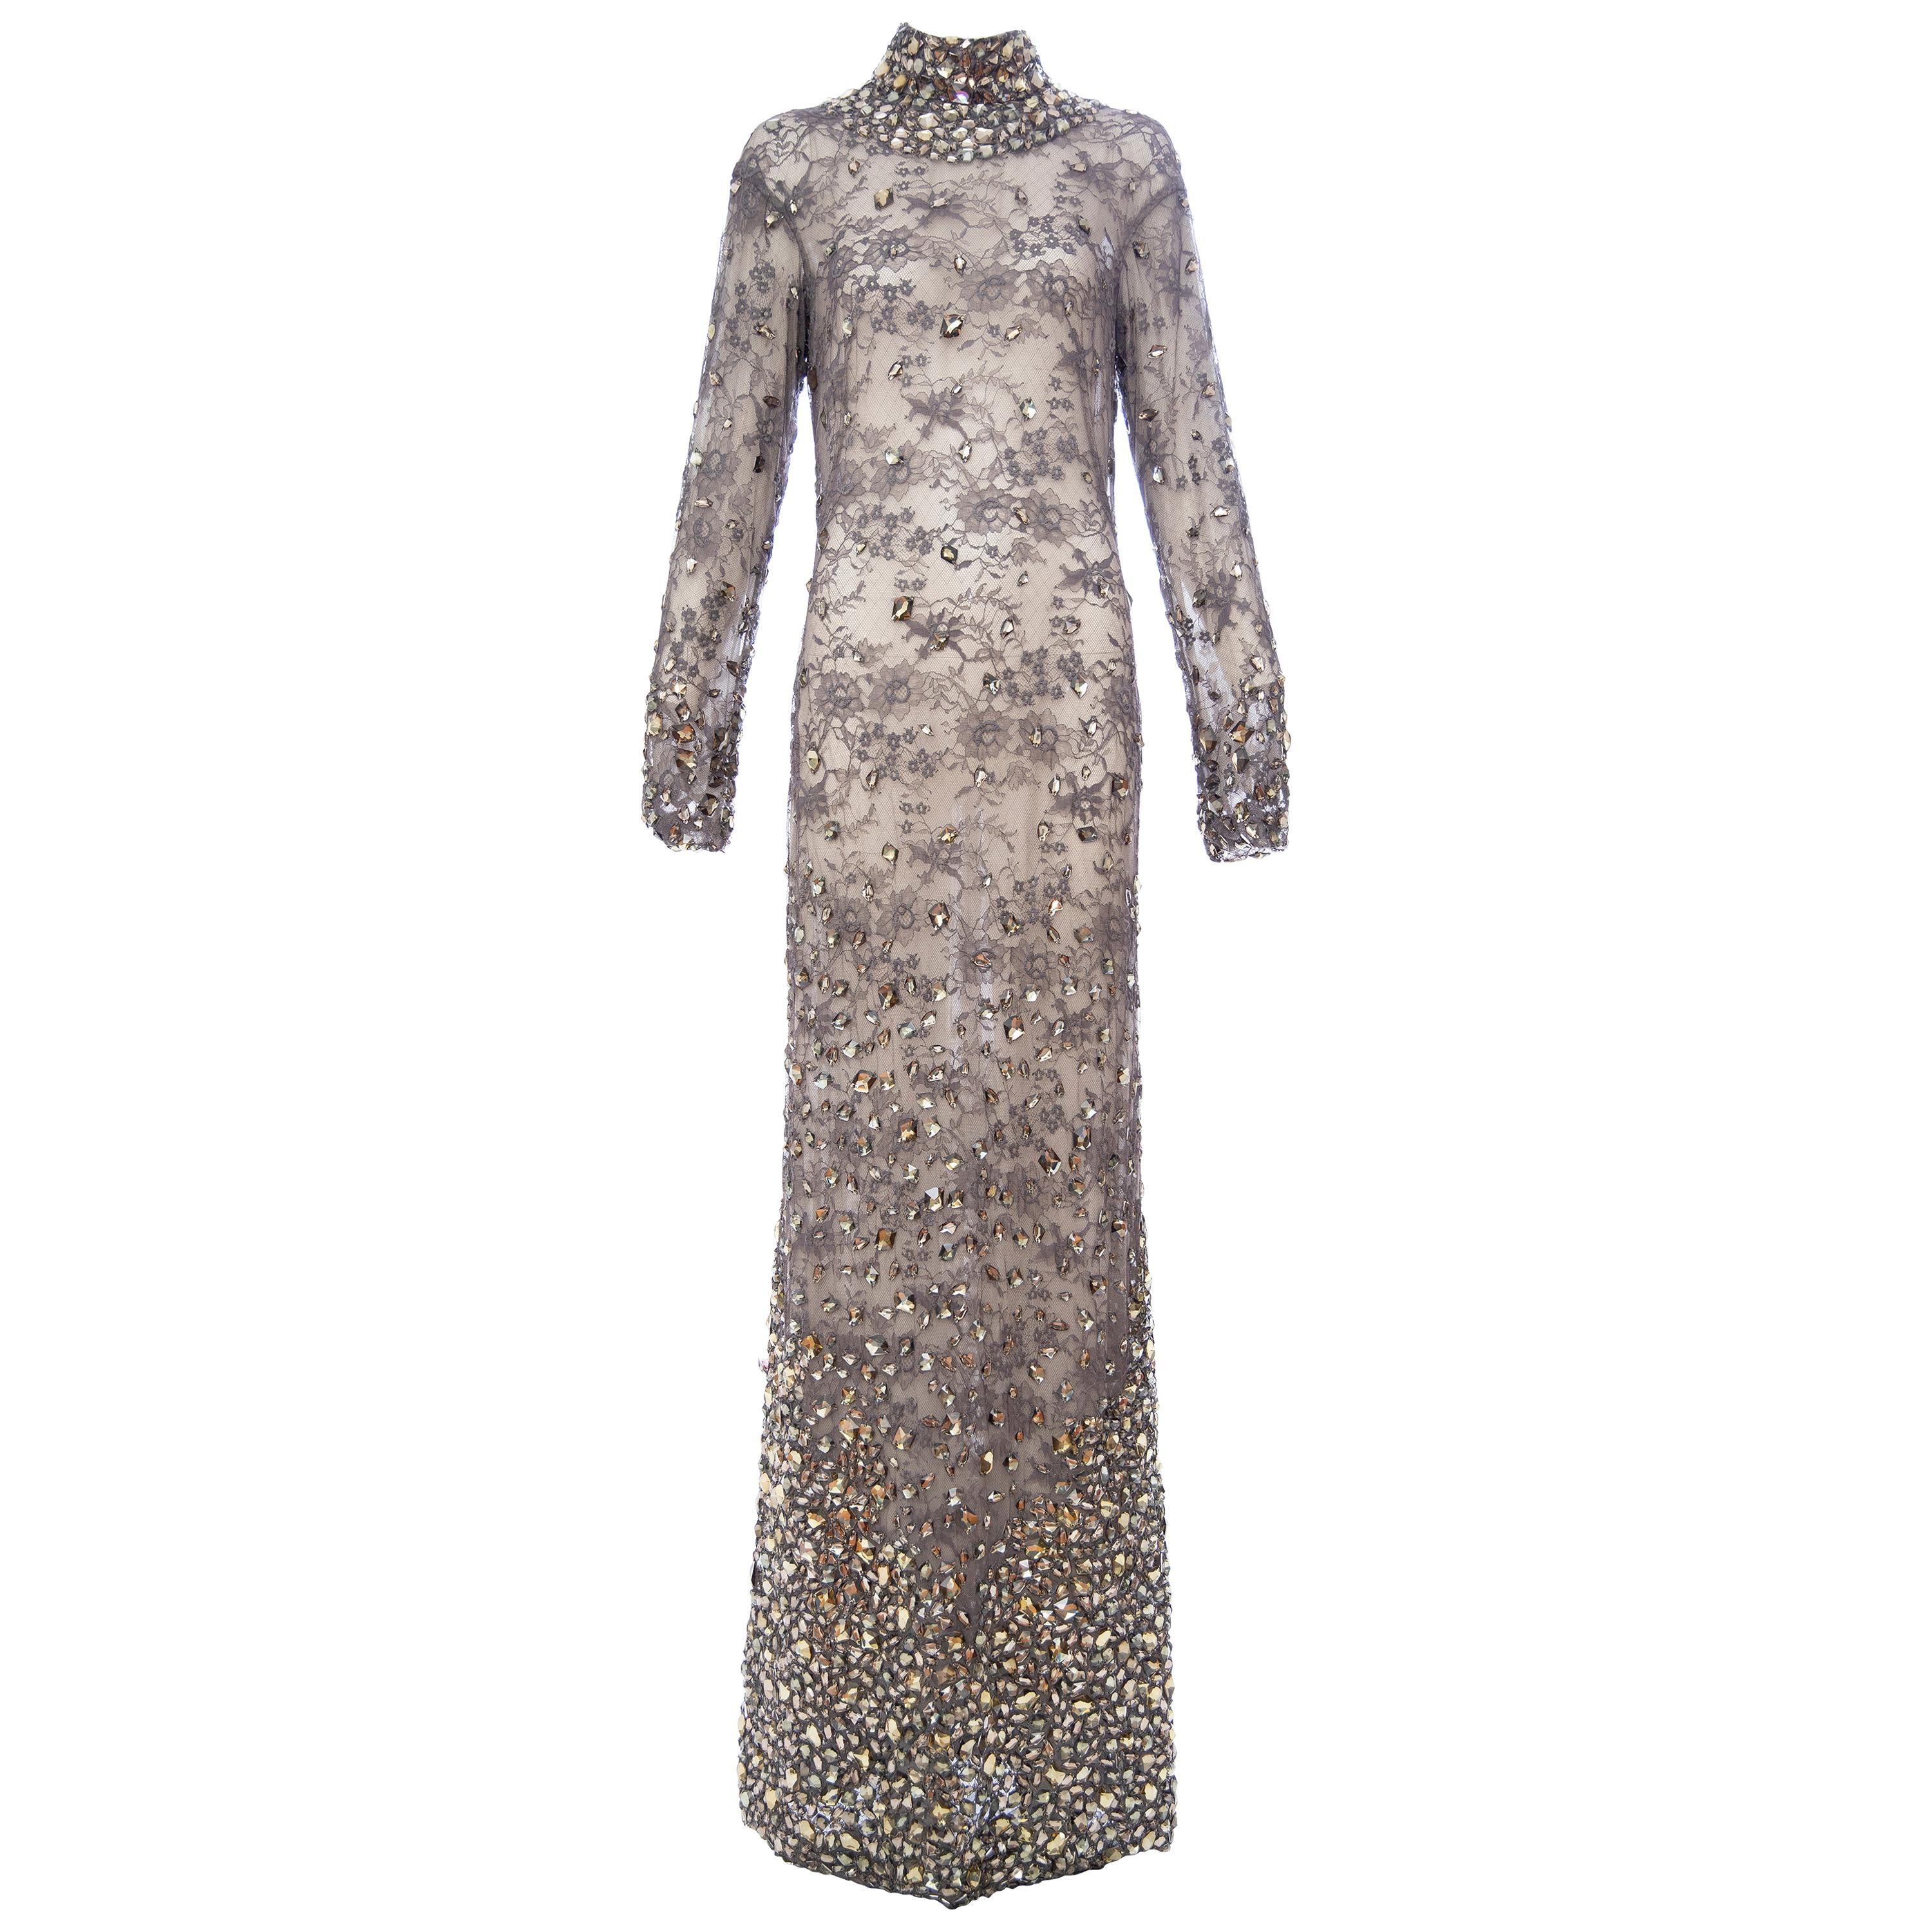 Tom Ford Runway Smokey Grey Lace Appliquéd Faceted Gems Evening Dress, Fall 2011 For Sale